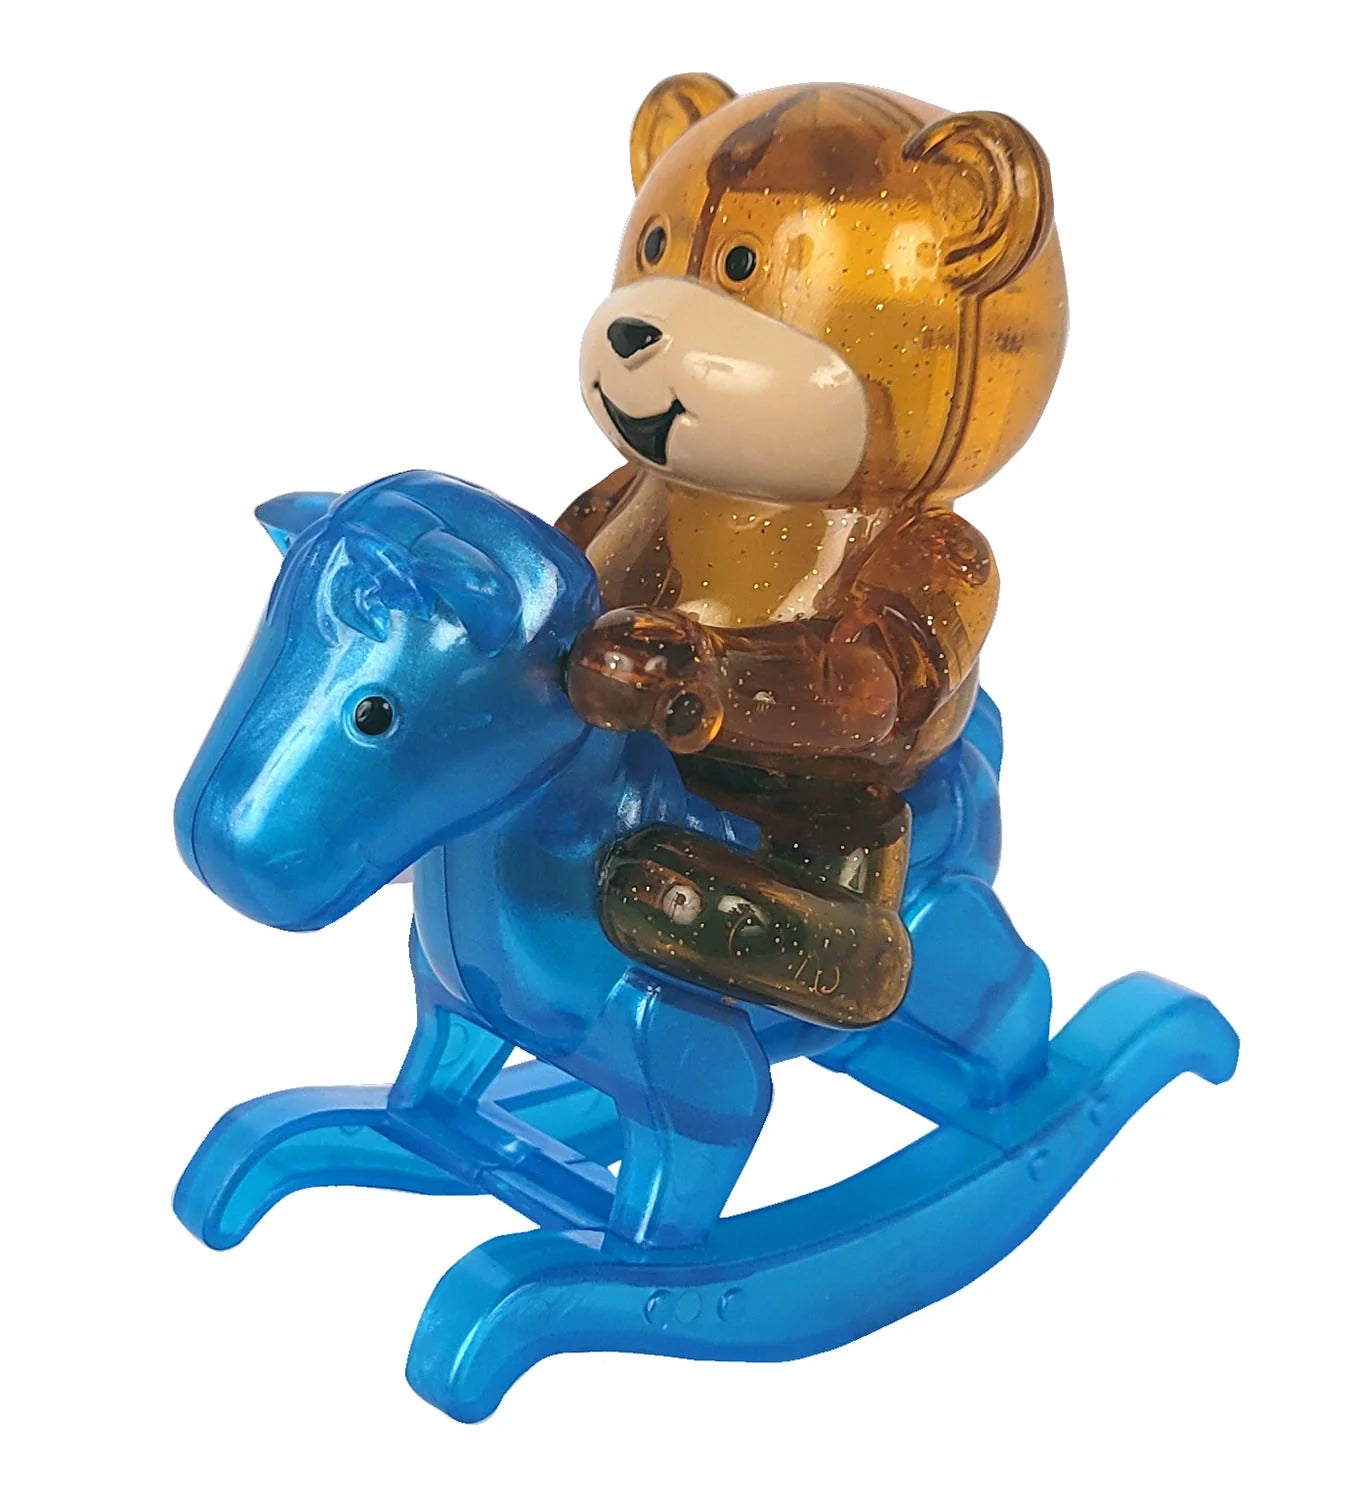 Ricky the Rocking Horse Wind Up